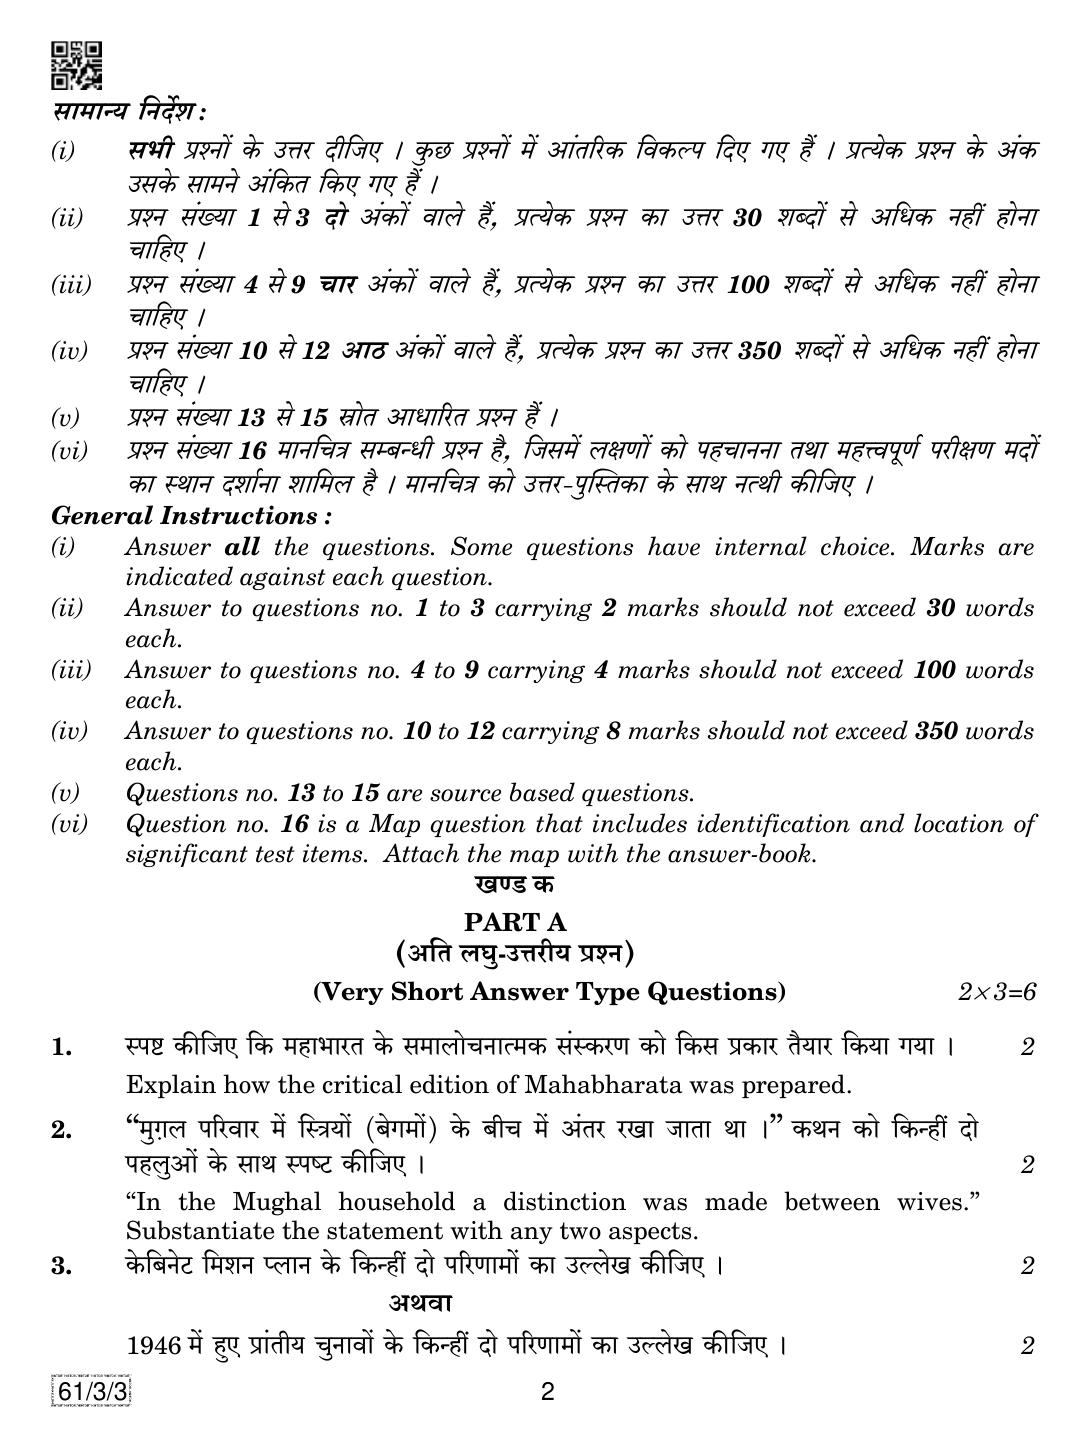 CBSE Class 12 61-3-3 History 2019 Question Paper - Page 2